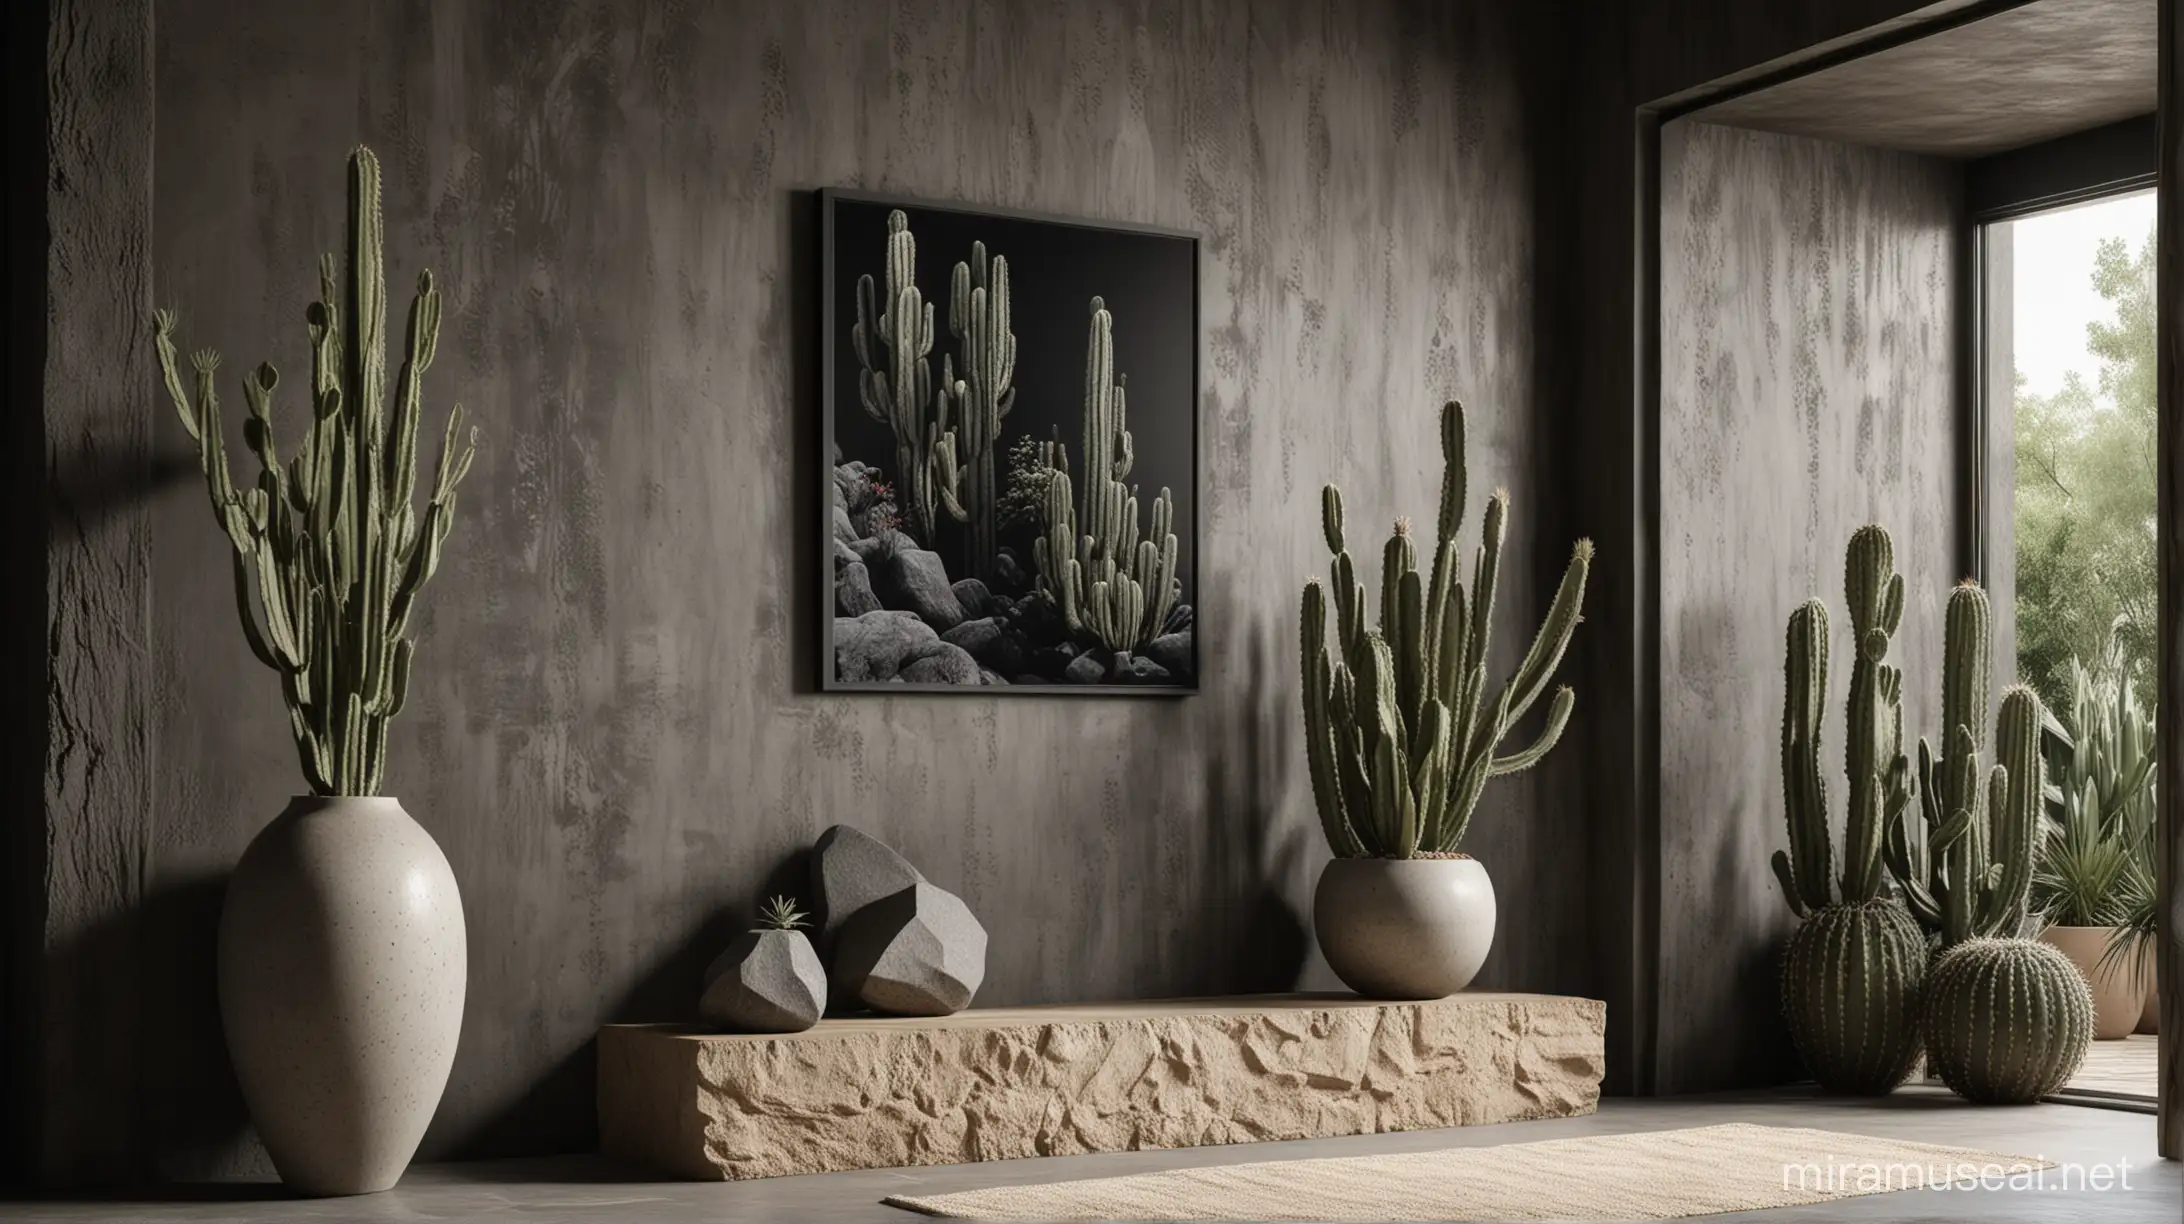 A gorgeous black wall contemporary close up framed black poster mockup with a minimal but rustic interior design including stairs and entrance hall, huge stone elements, including a contemporary Wabi Sabi huge vase in white sand finish as decoration with huge cactus, huge windows in the magazine style of ARCHITECTURAL DIGEST, a high quality architectural visualization, using 3D modeling software with photorealistic materials and advanced lighting techniques to showcase the intricate details and modern look of the room